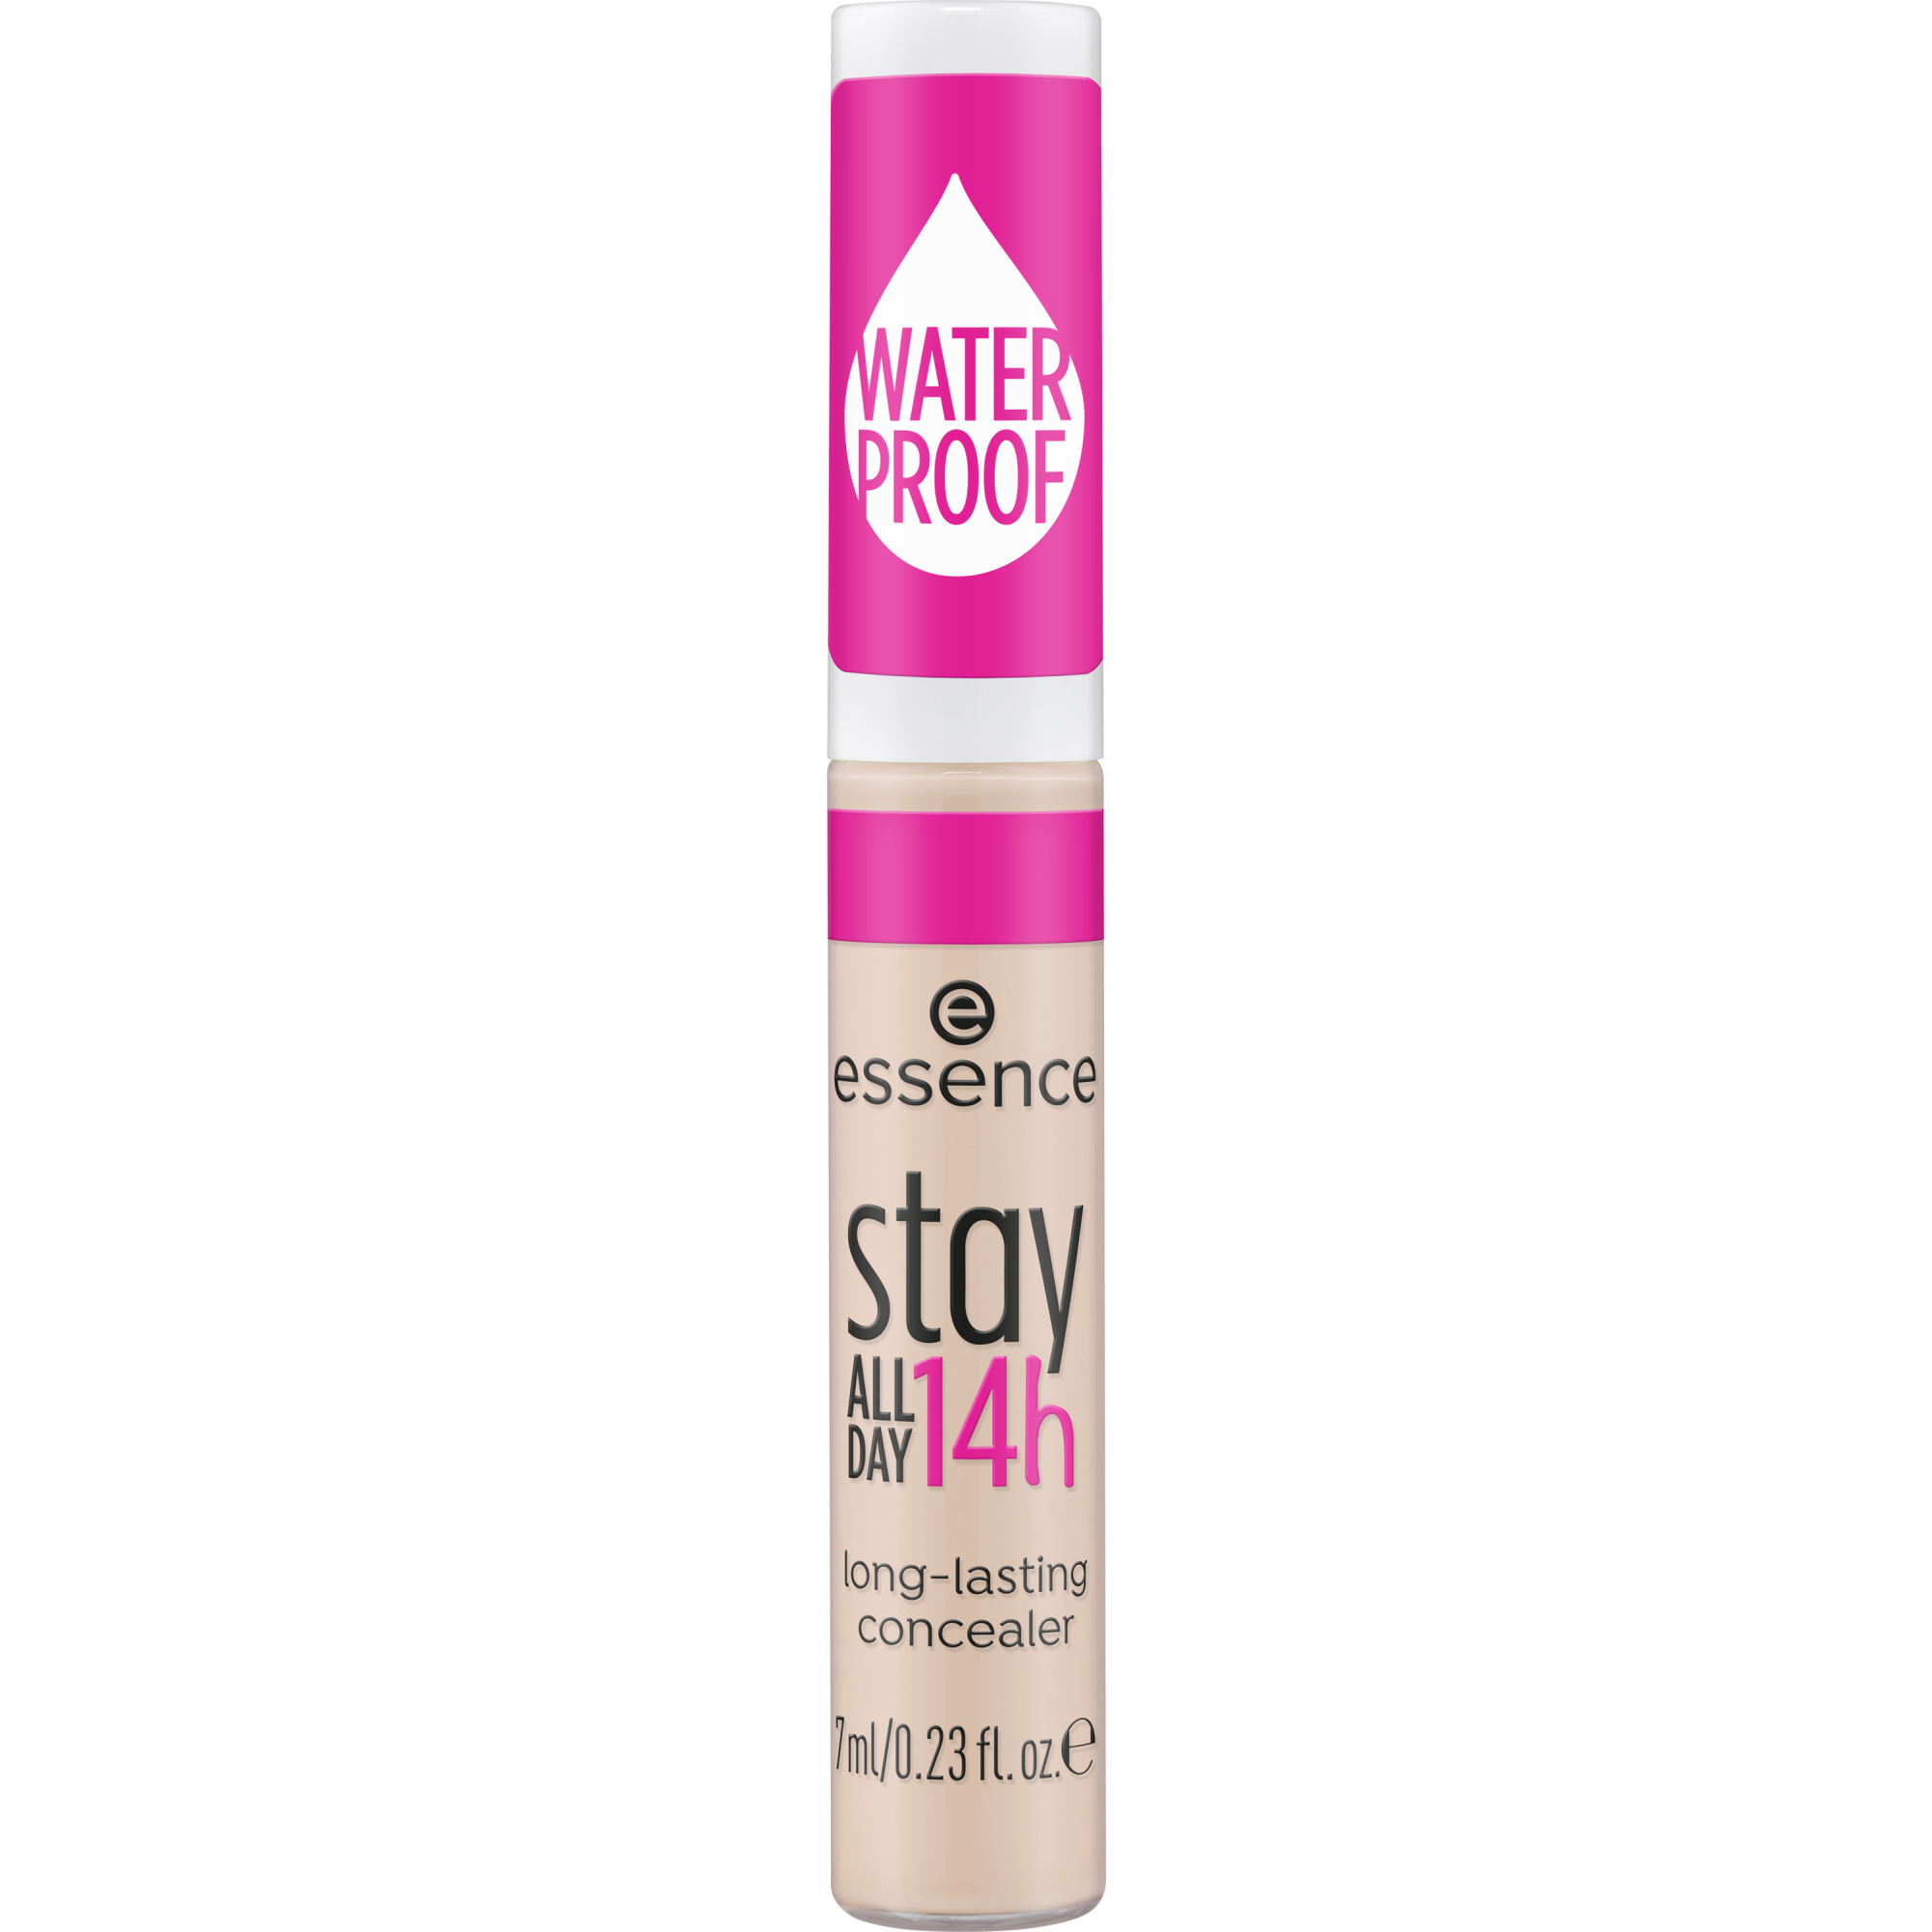 stay ALL DAY 14h long-lasting concealer correcteur longue tenue